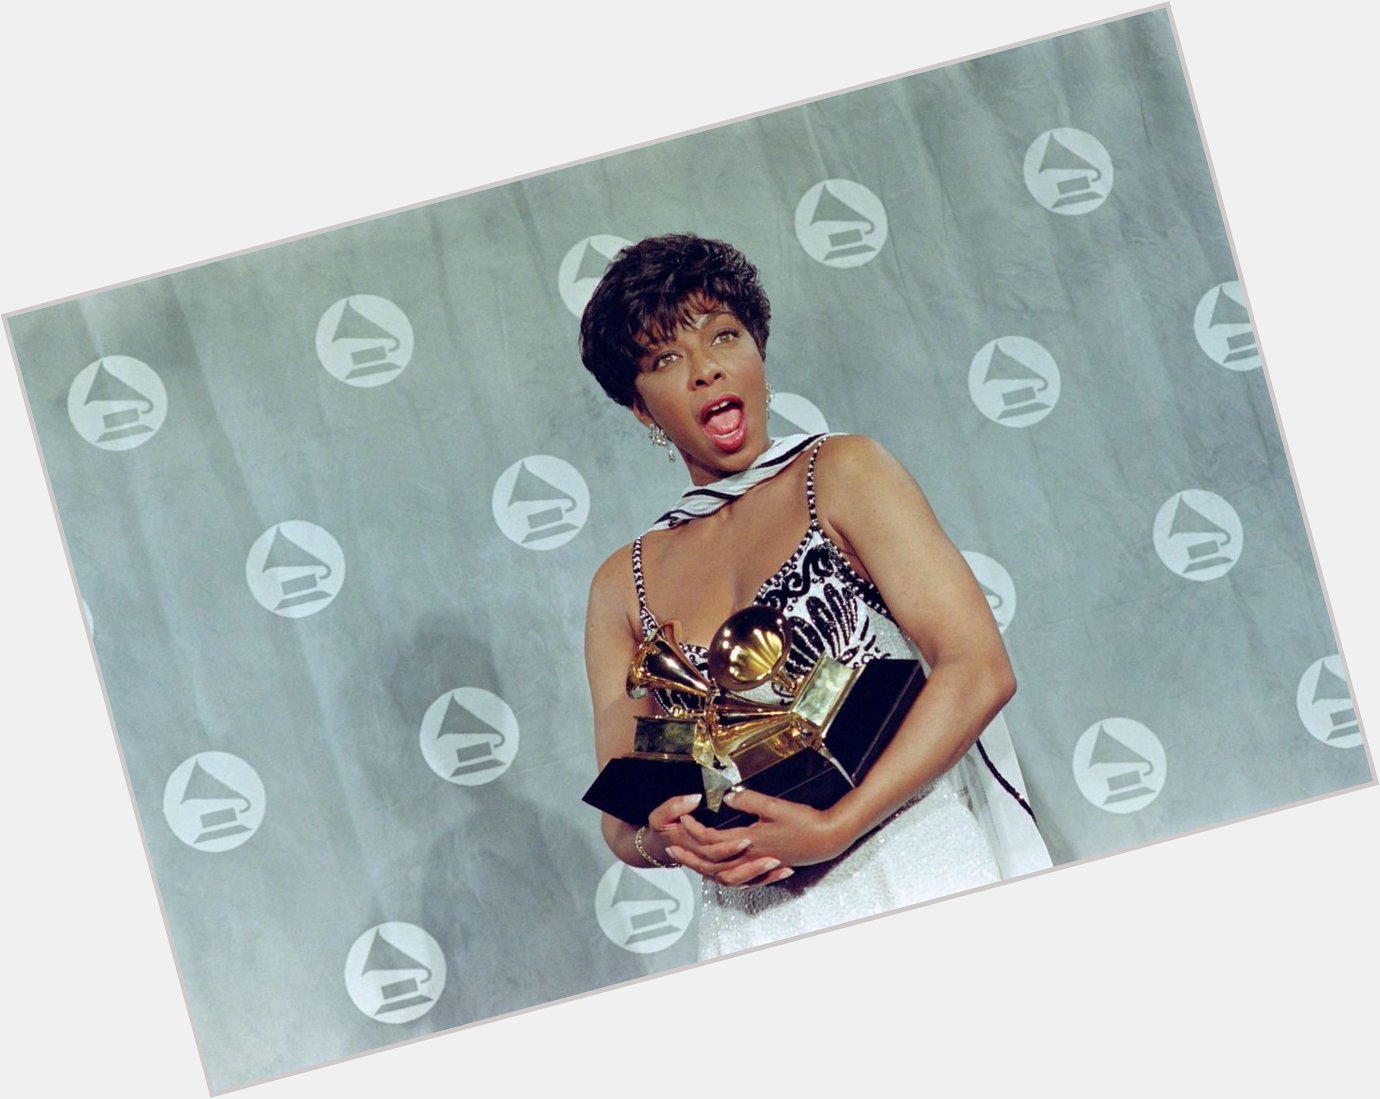 Happy Birthday to Natalie Cole who would have turned 68 today! 